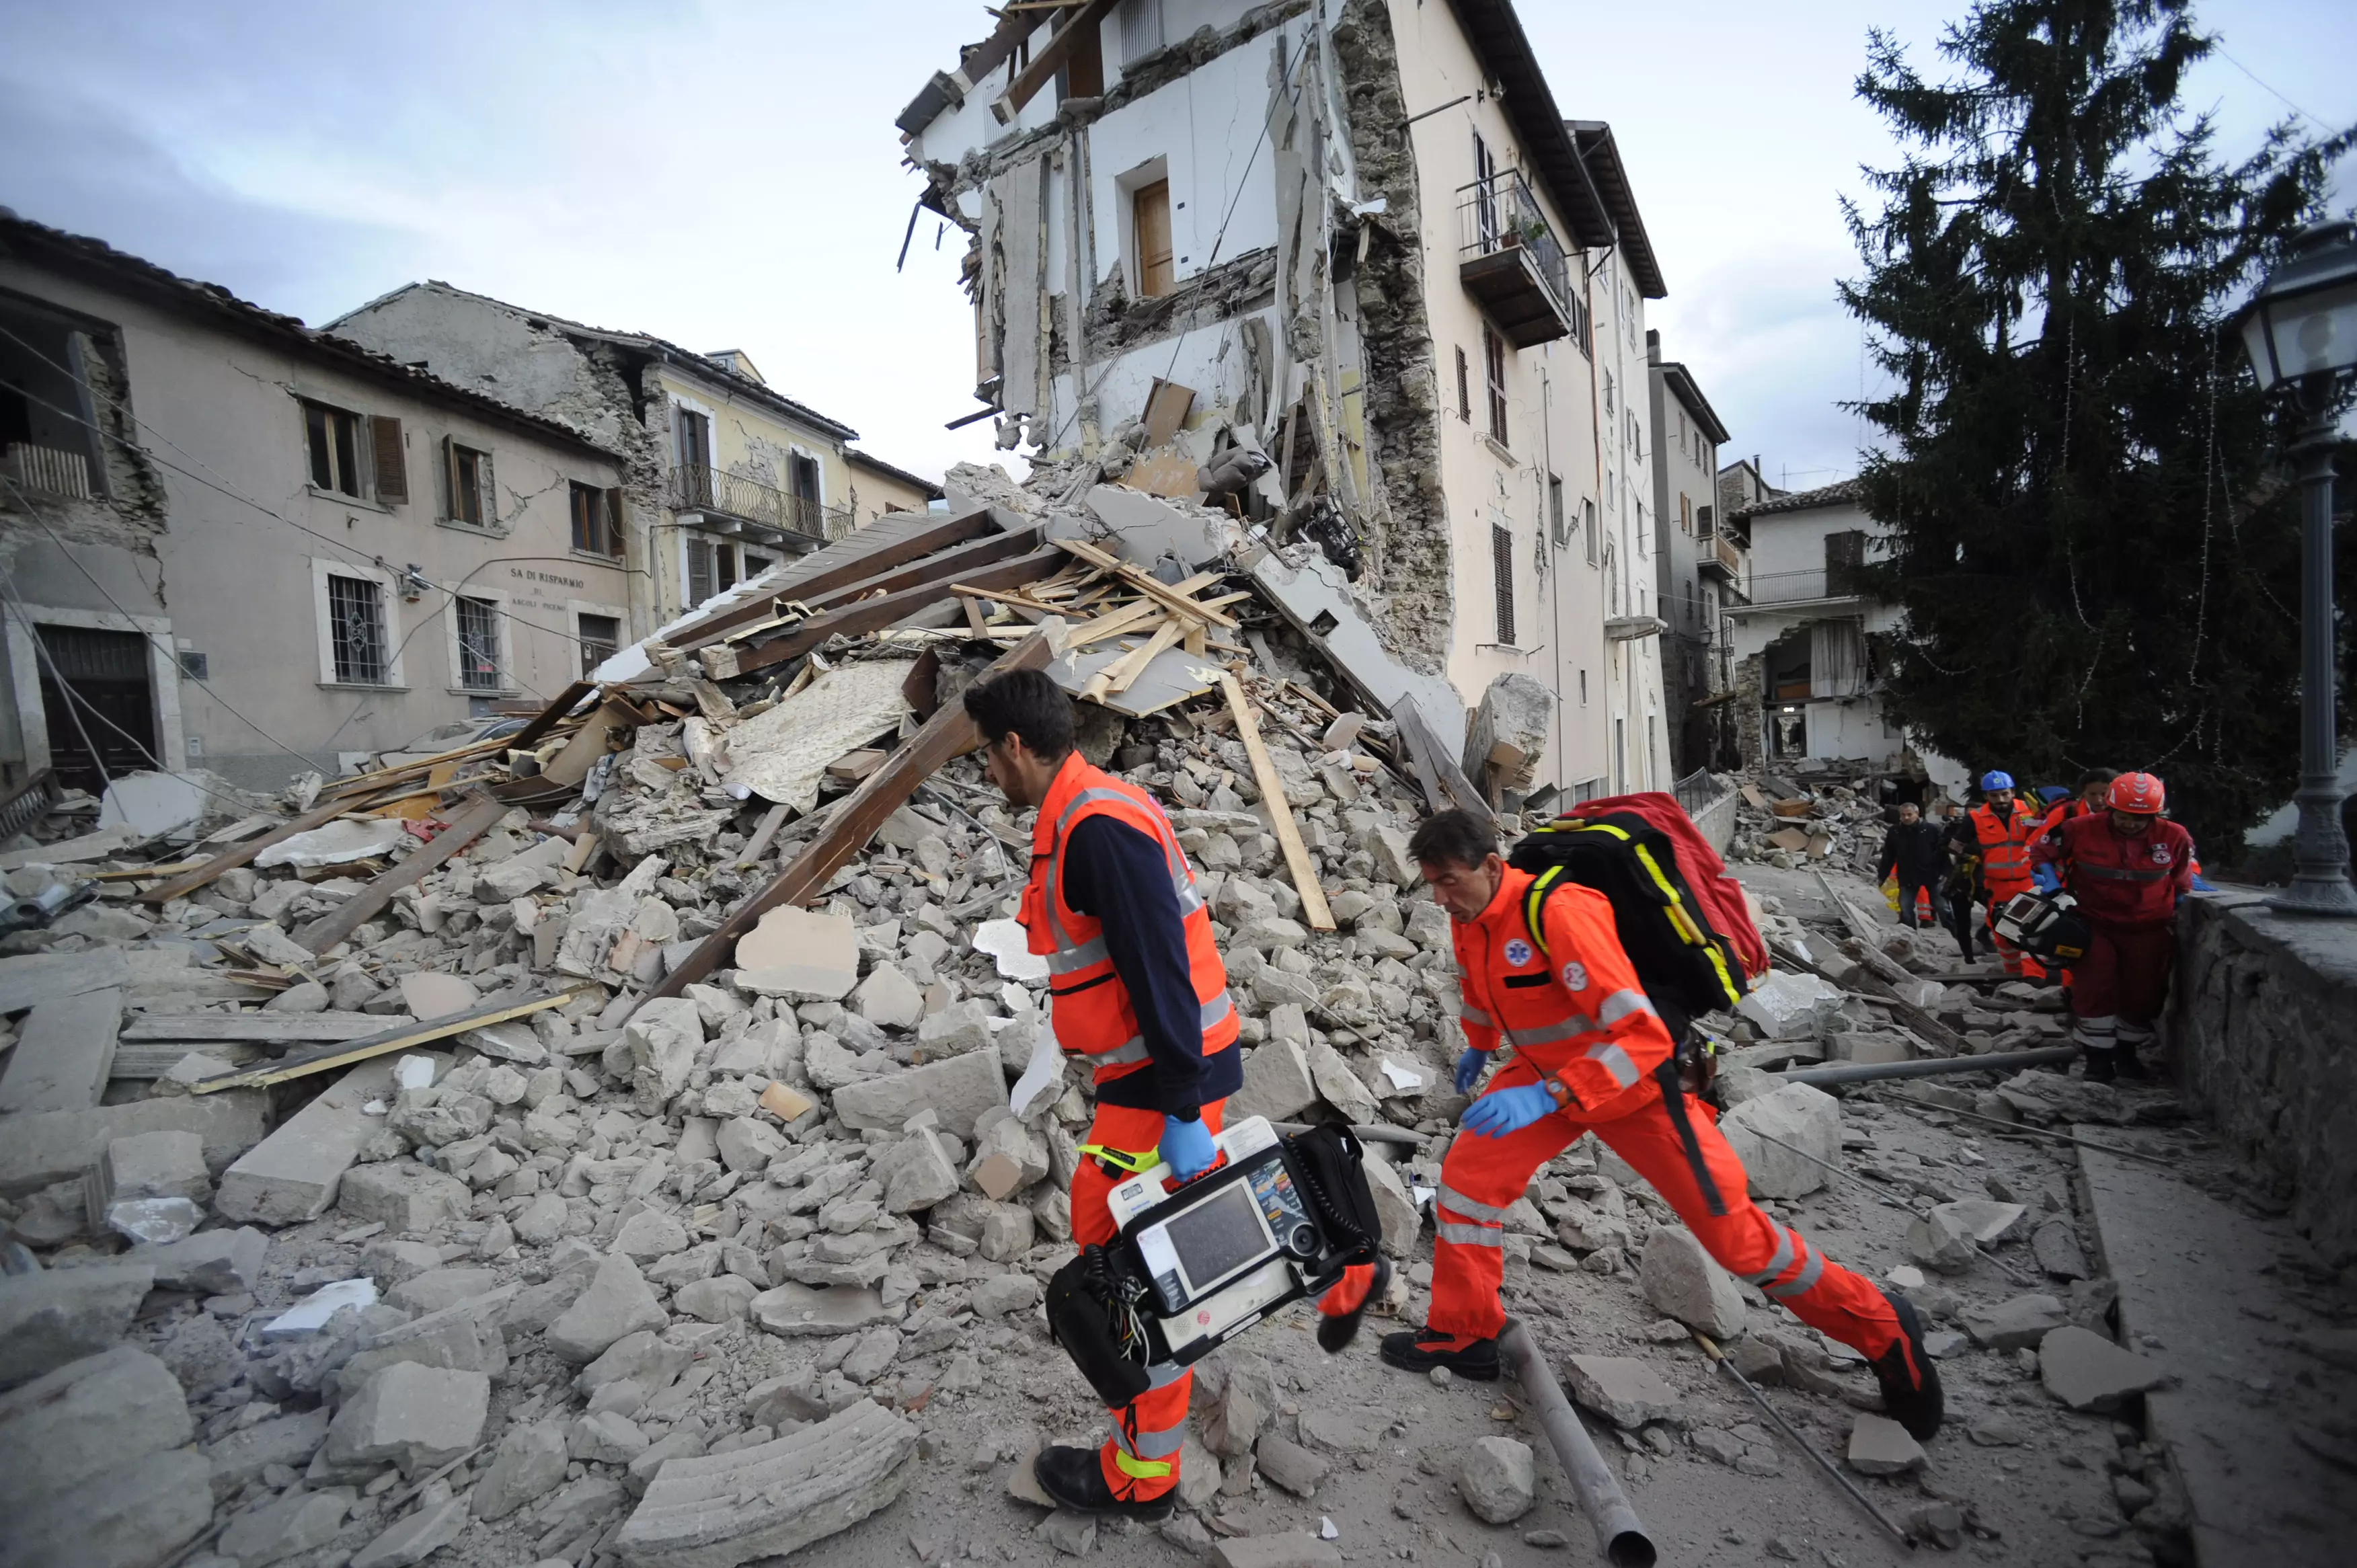 ​Many Feared Dead And Others Trapped After Devastating Earthquake Strikes Central Italy